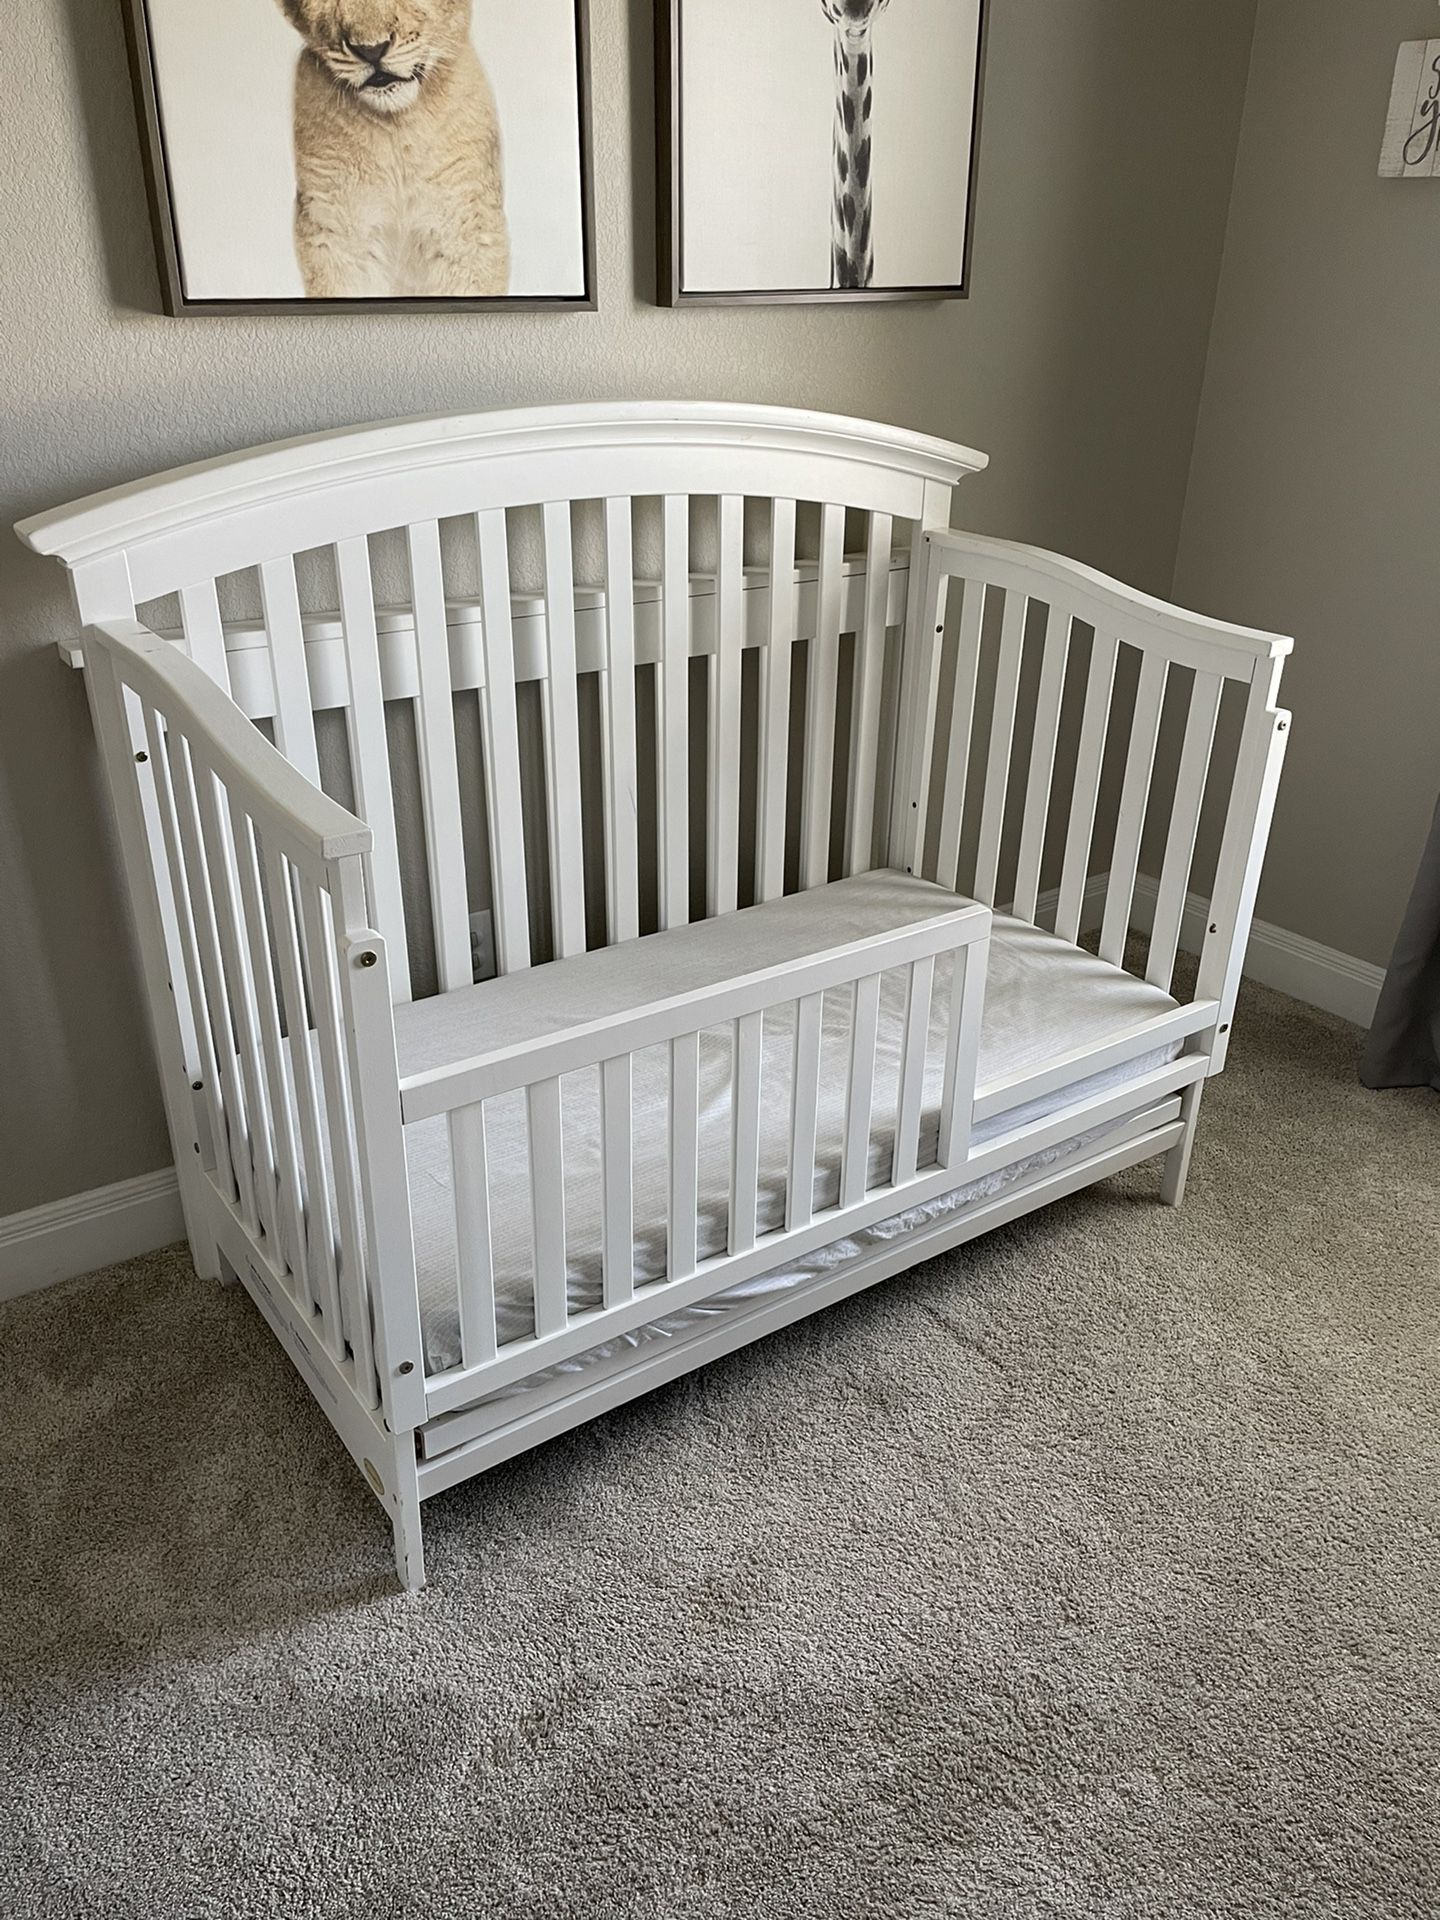 Crib Converts To Toddler And Full Bed (including Mattress) 